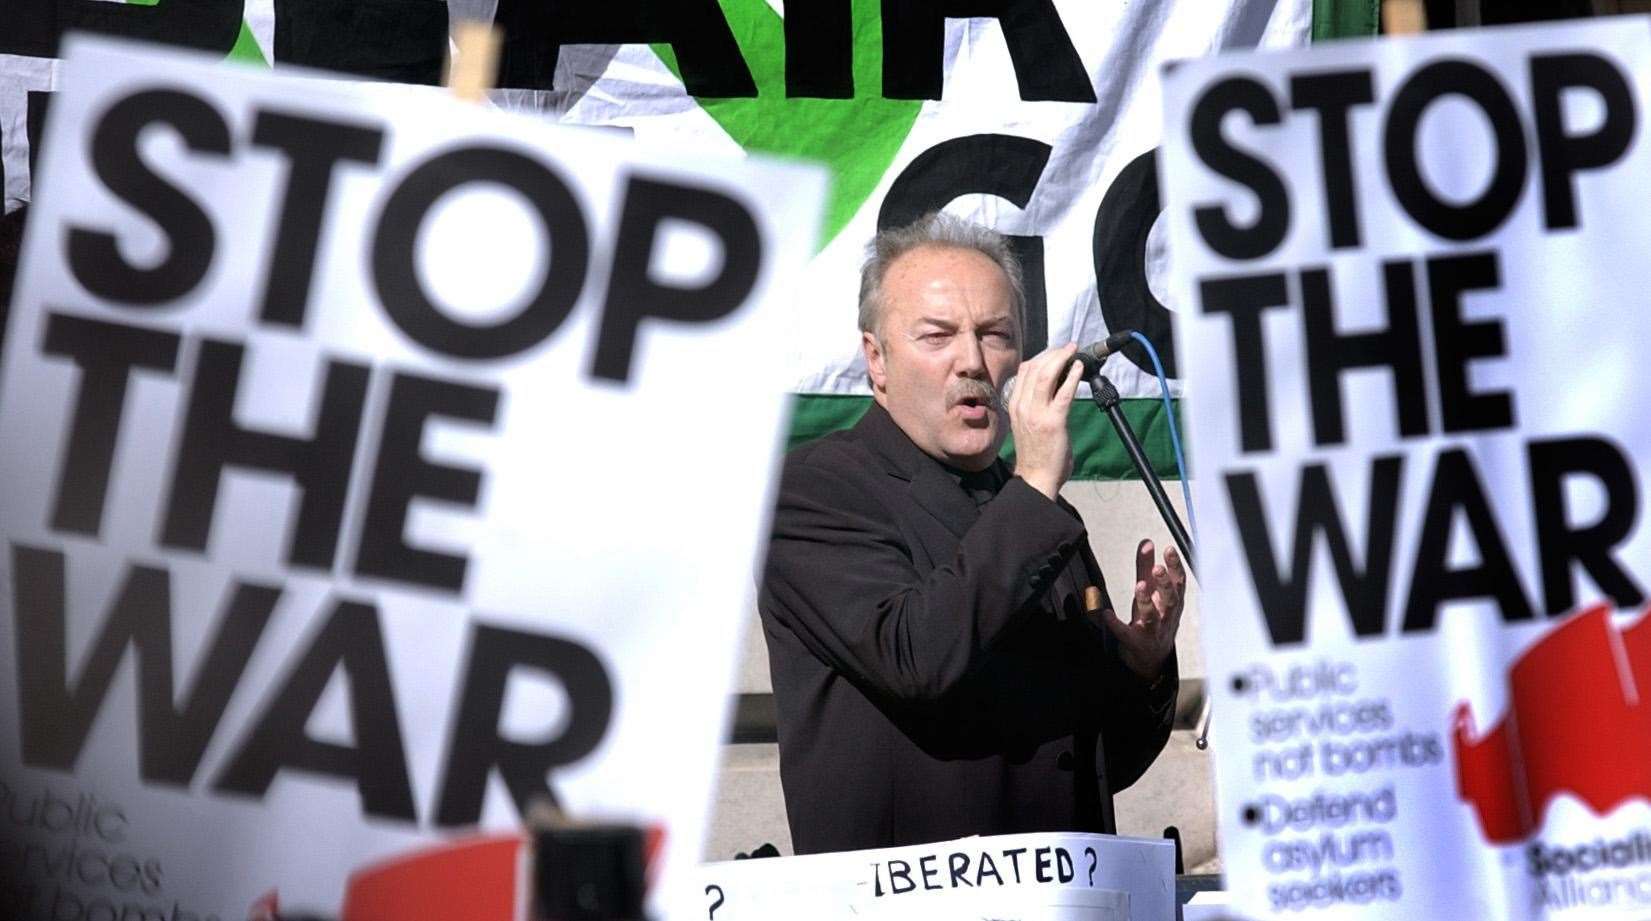 George Galloway proved a thorn in the side of the Labour leadership, but it was his opposition to the 2003 Iraq War that saw him expelled from the party (Stefan Rousseau/PA)